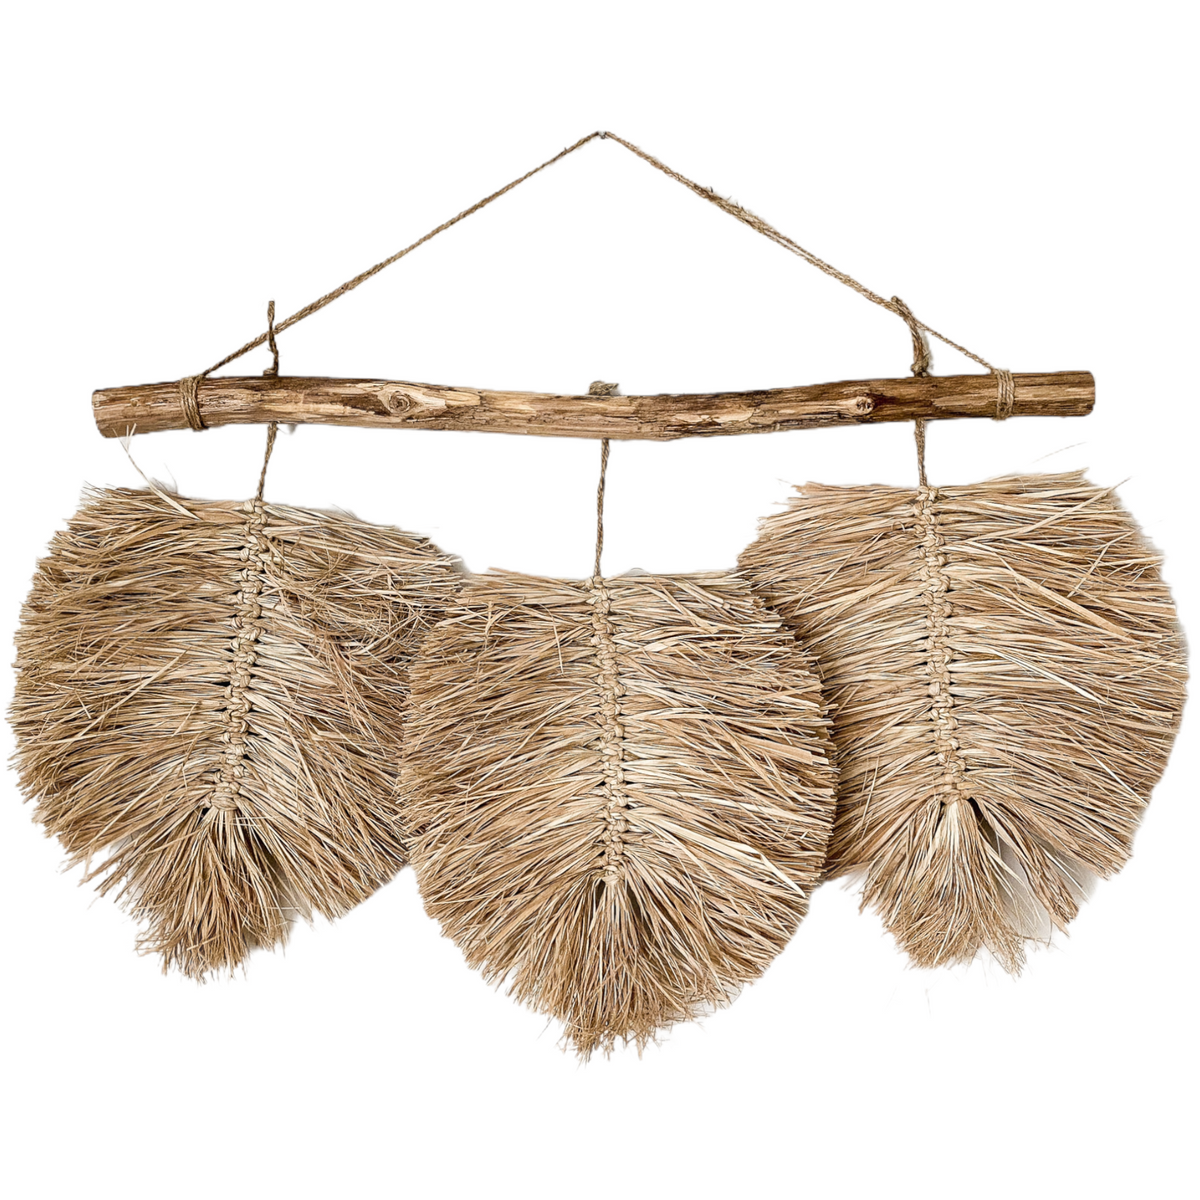 A trio of hand braided raffia leaves hang from a natural driftwood piece found by the coast & completed with a Jute hanger. This hanging is ideal for those who love raw texture & the feel of natural materials in their home.  Hang from your favourite hook, or simply mount on the wall, the Laos design will create a textural statement while adding rustic coastal elements to your space.   